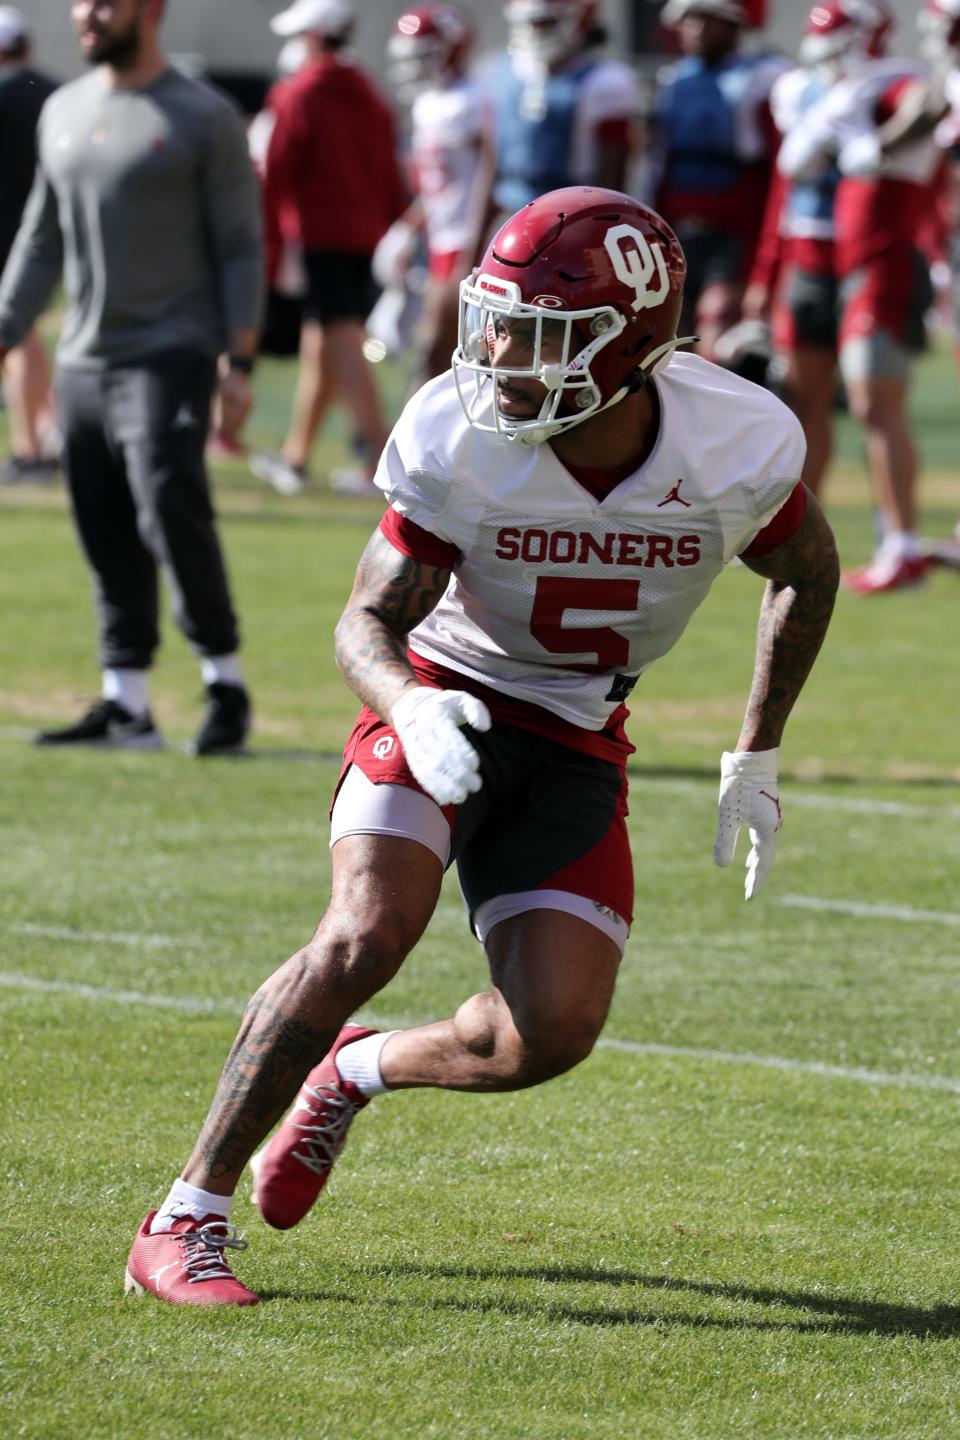 Woodi Washington goes through drills as the University of Oklahoma Sooners (OU) college football team holds spring practice outside of Gaylord Family/Oklahoma Memorial Stadium on March 21, 2023 in Norman, Okla. [Steve Sisney/For The Oklahoman]